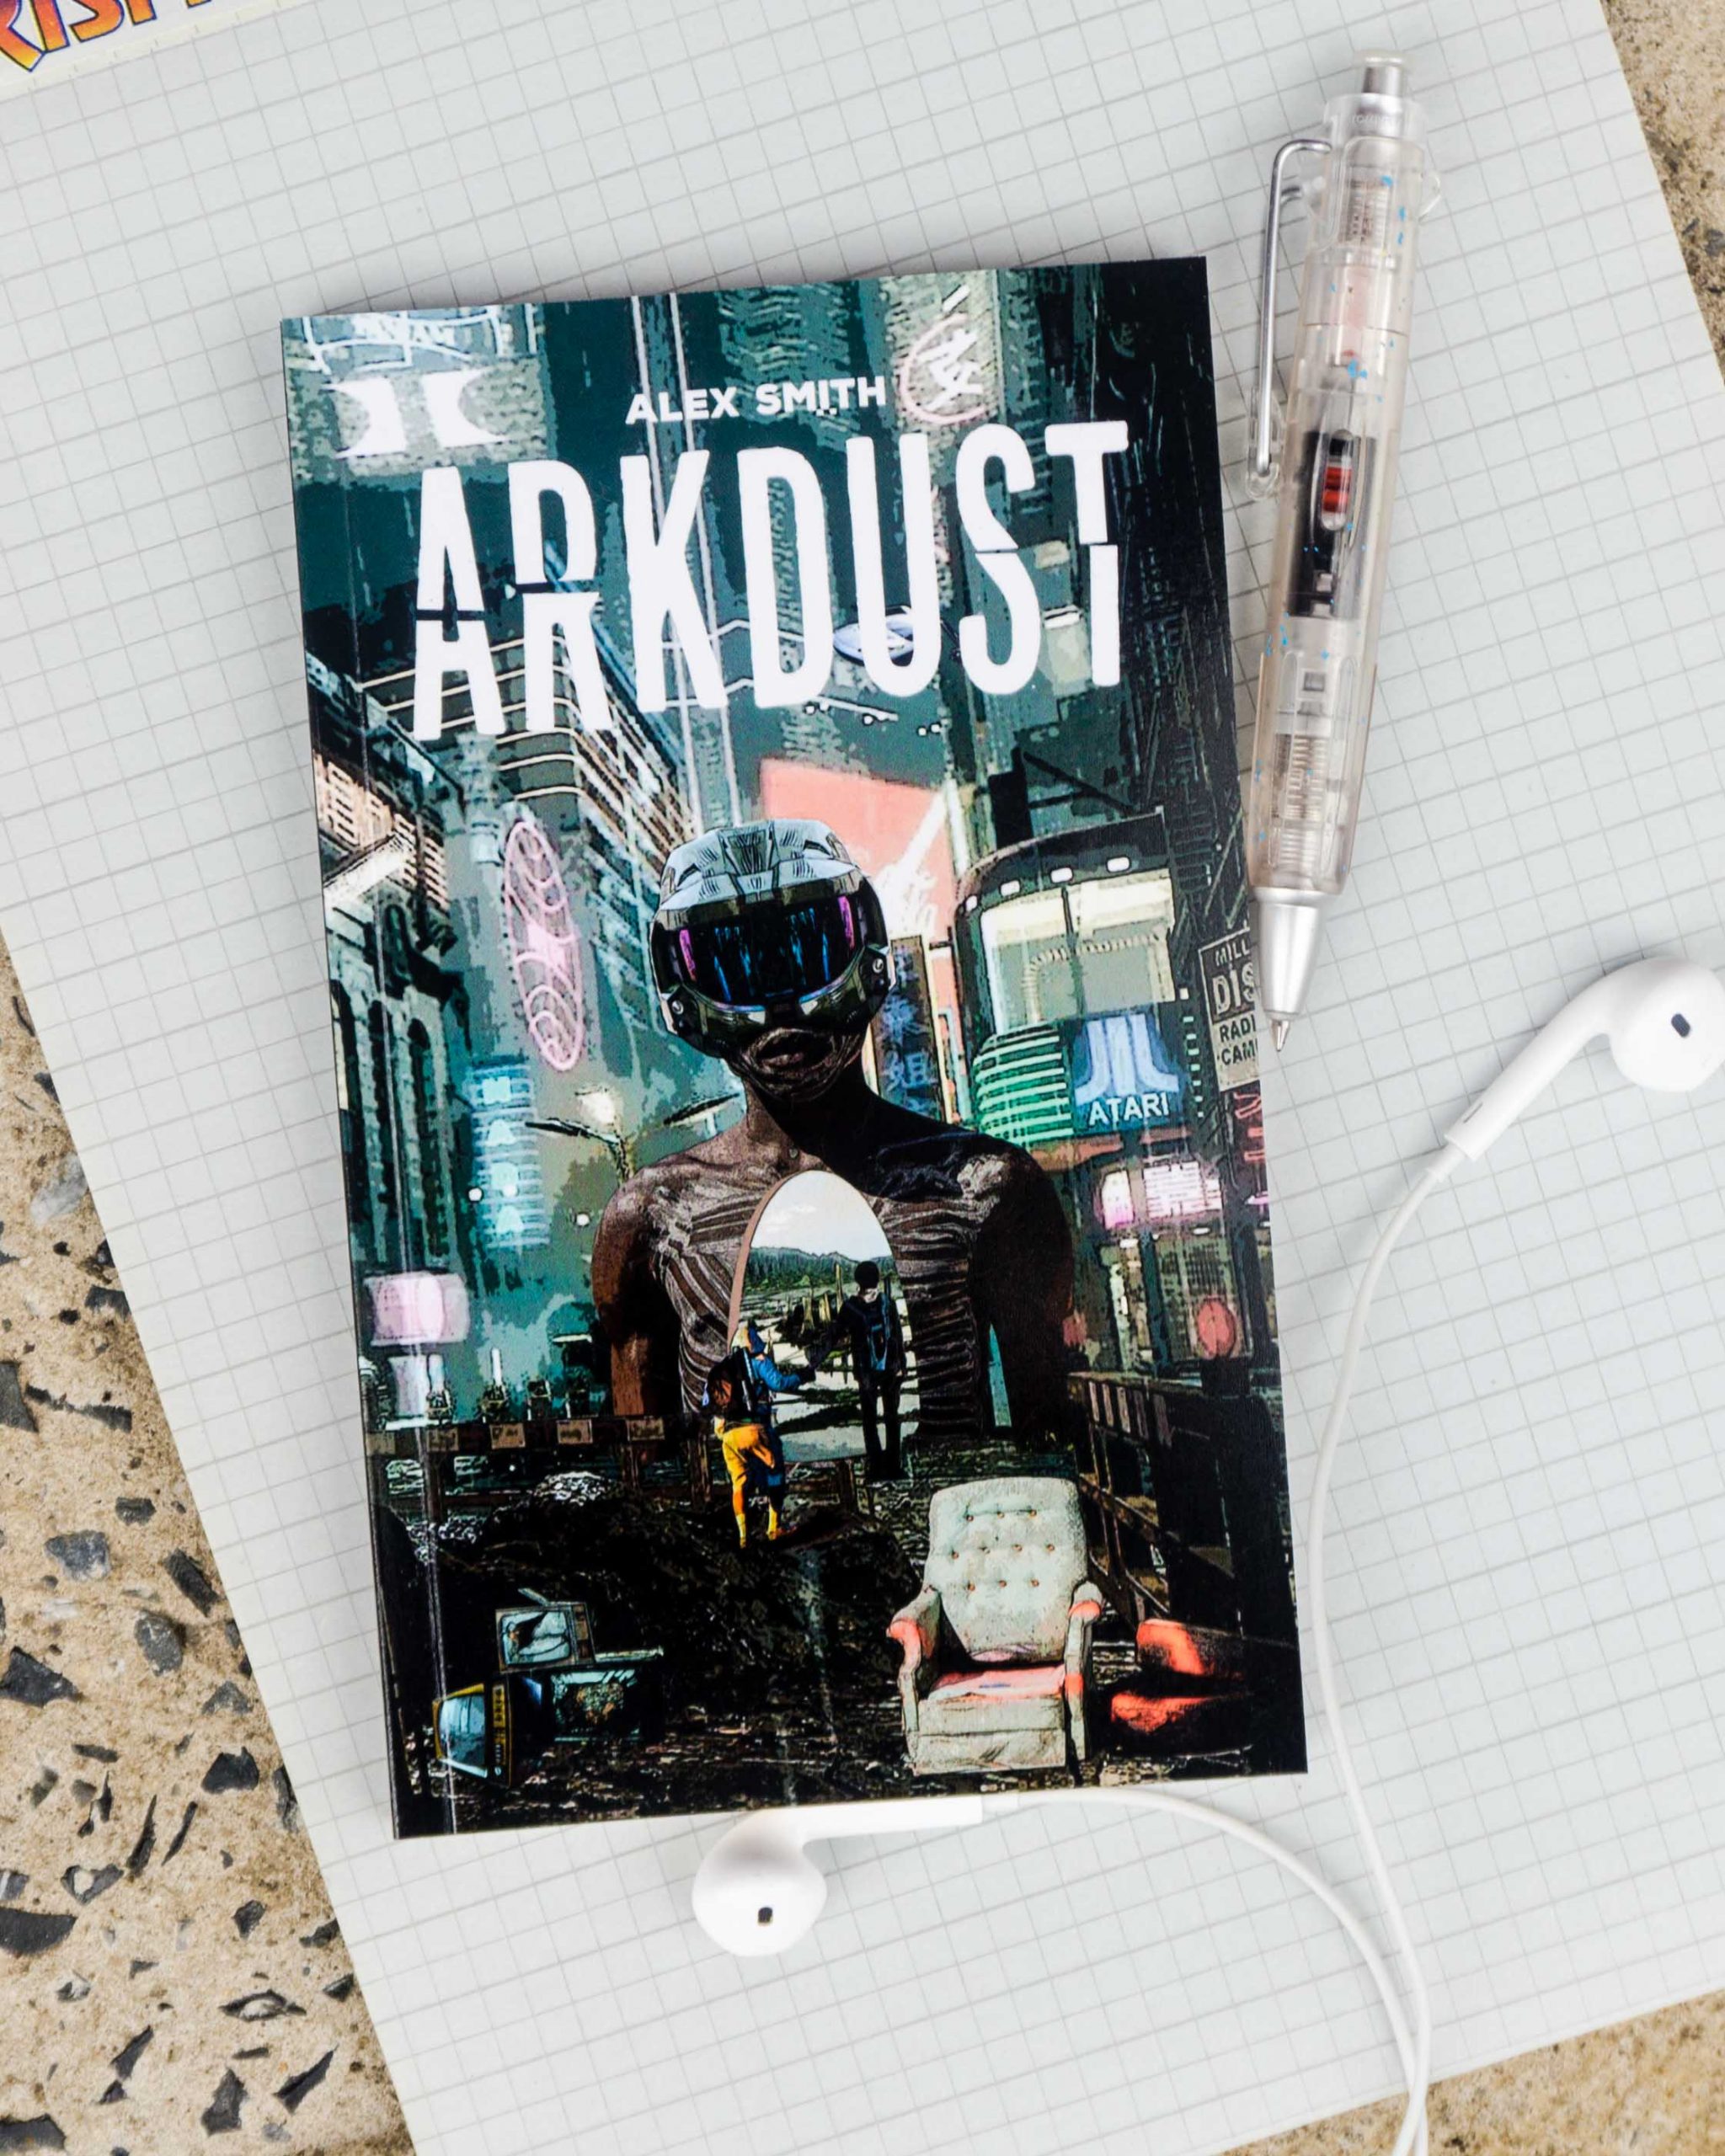 Monk Reviews ARKDUST by Alex Smith